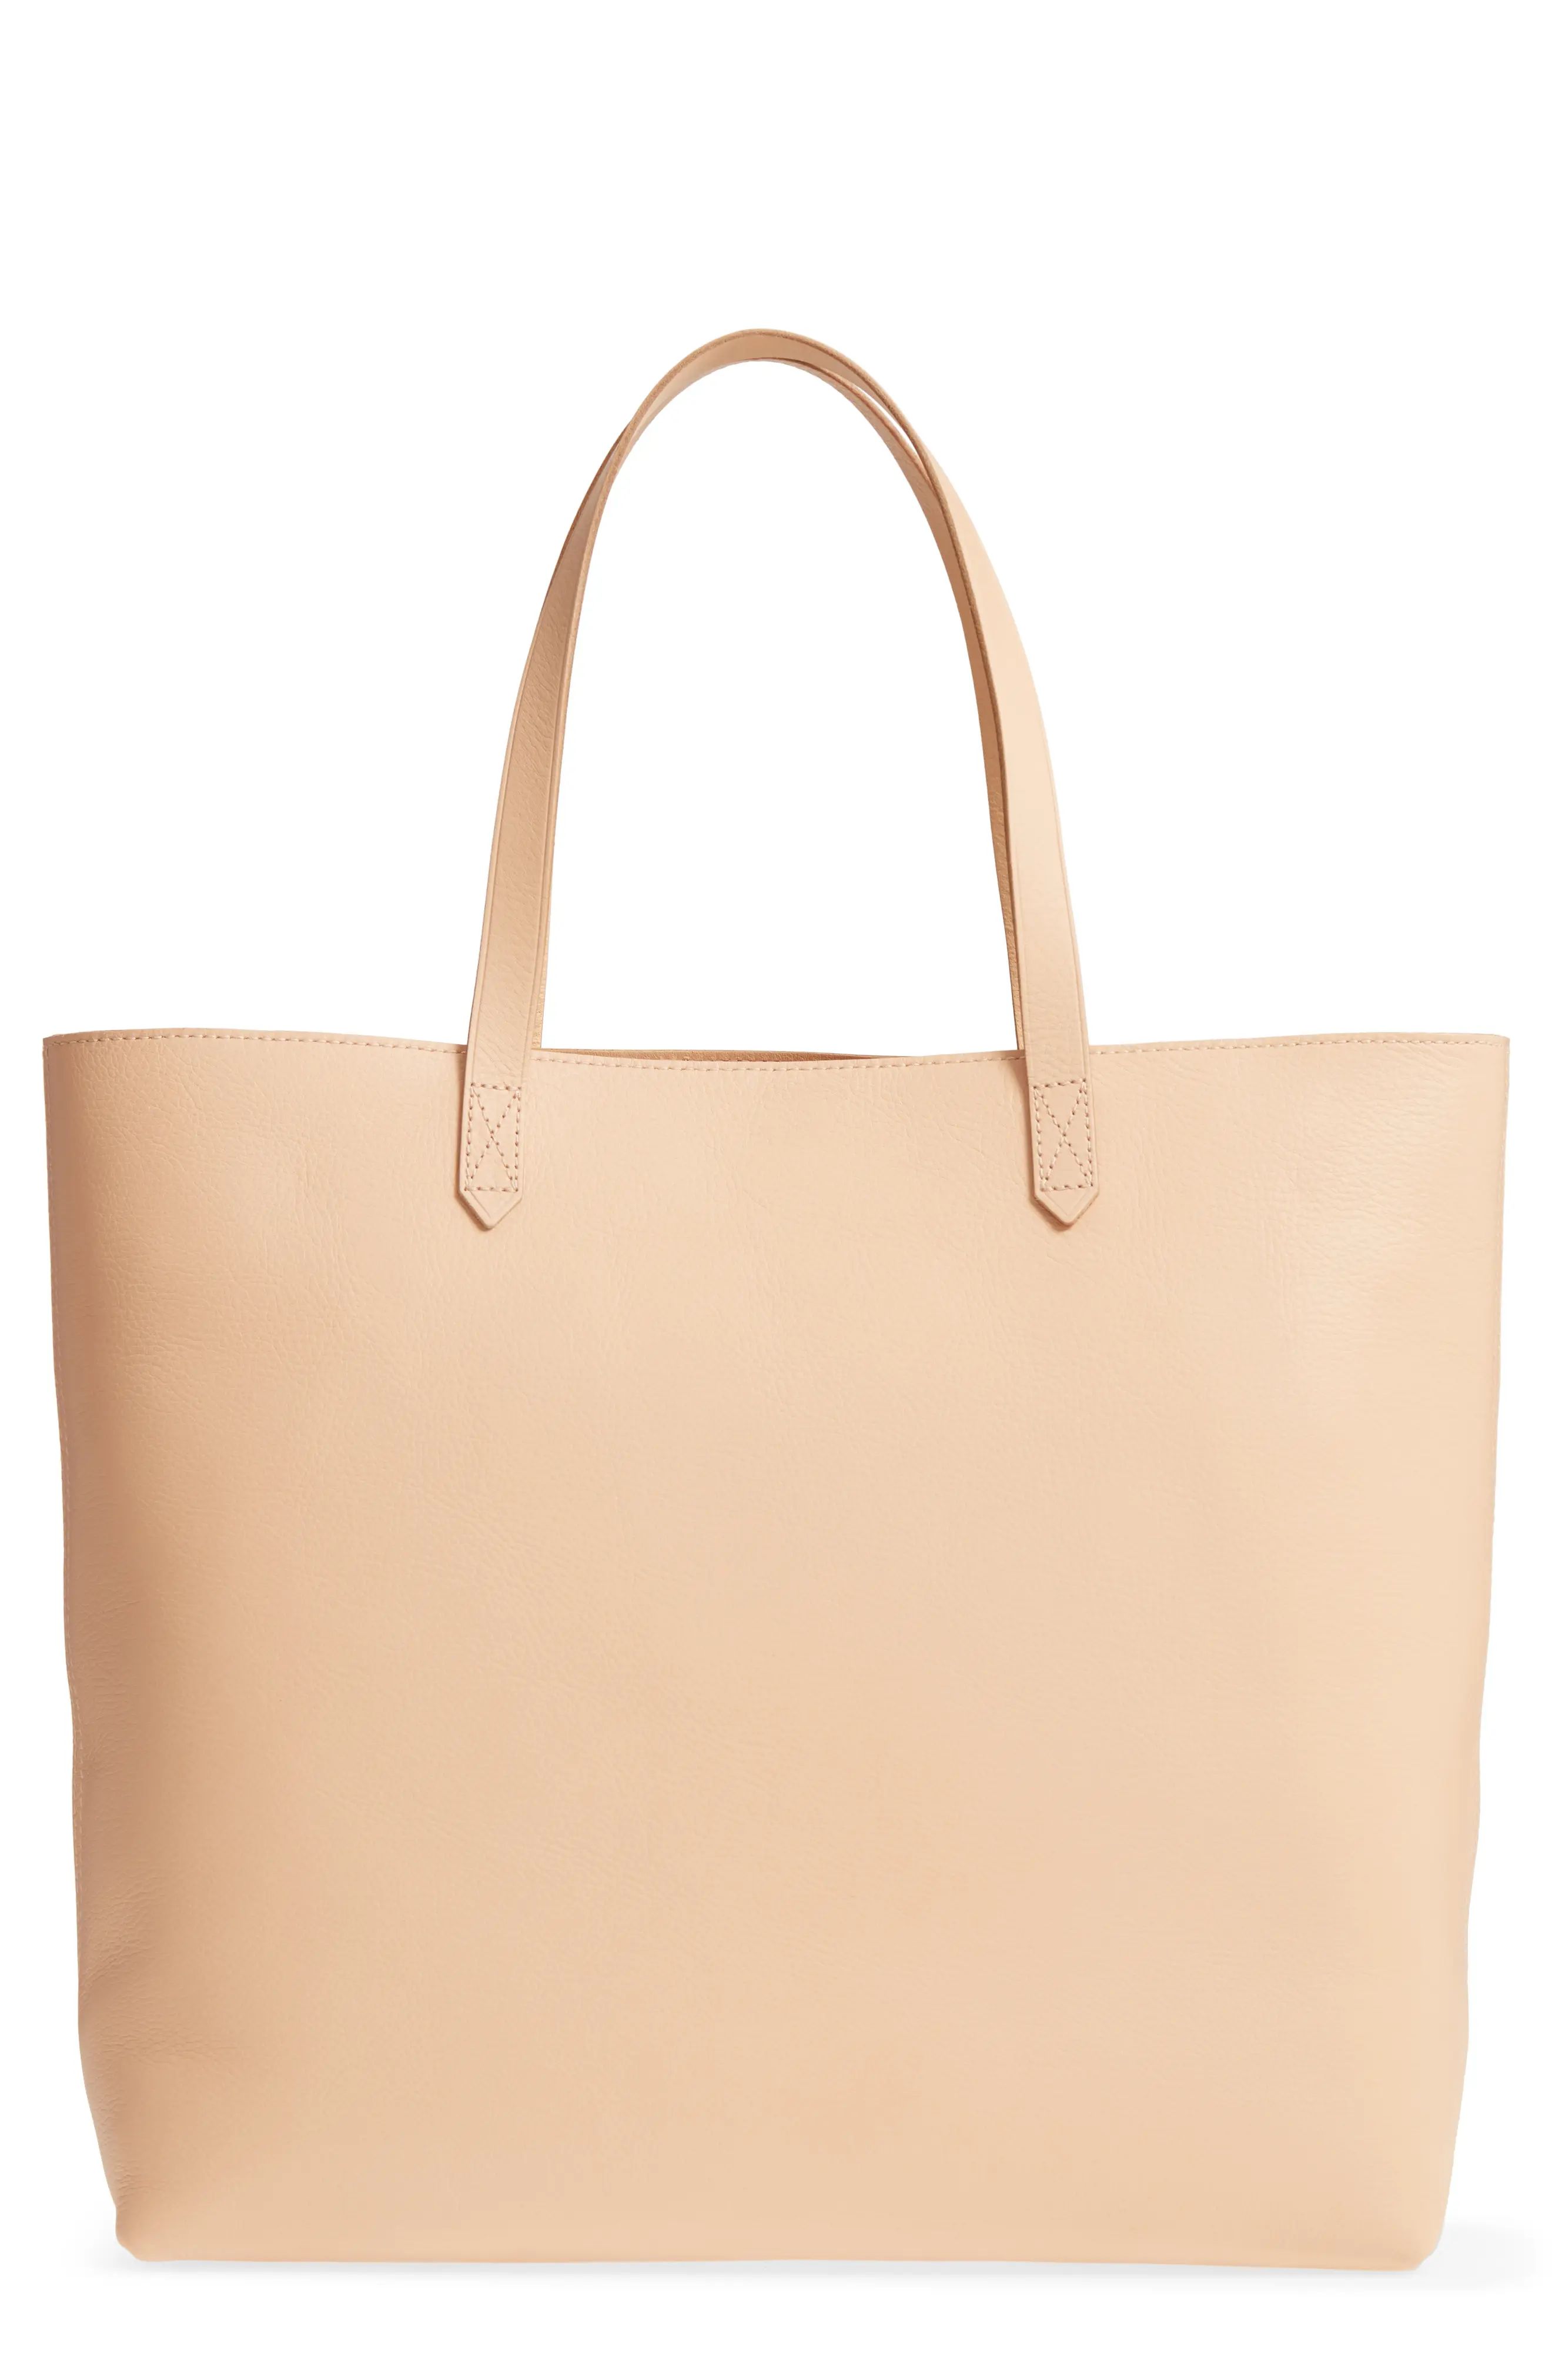 Madewell Zip Top Transport Leather Tote | Nordstrom